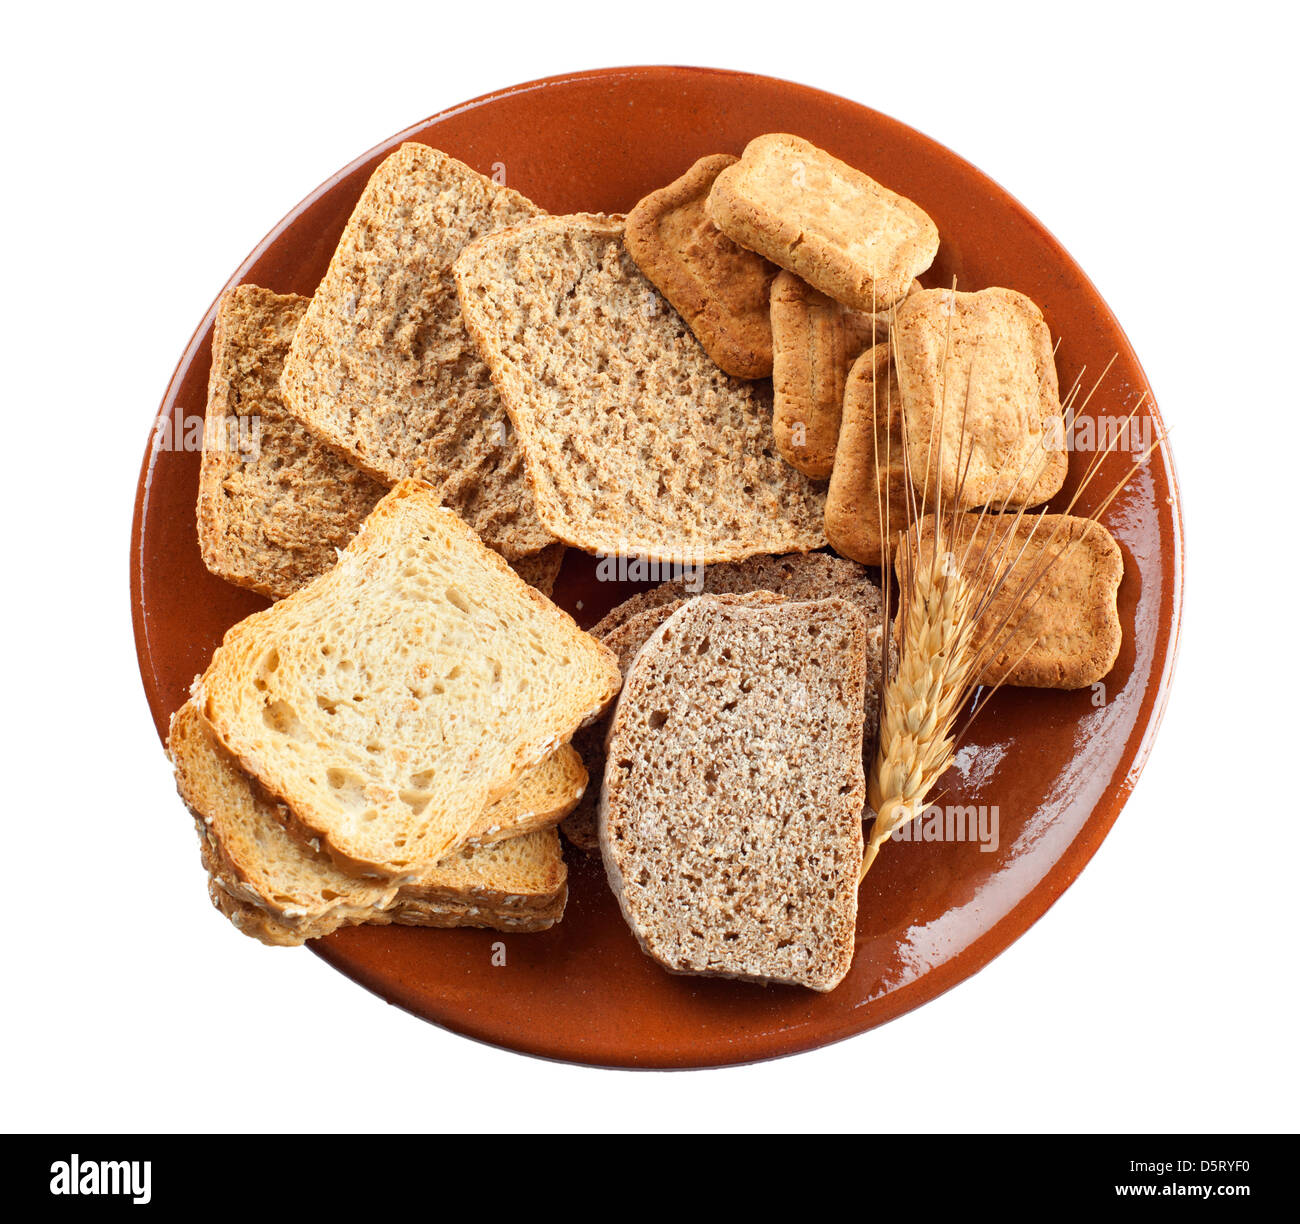 Whole grain carbohydrates on white background Stock Photo